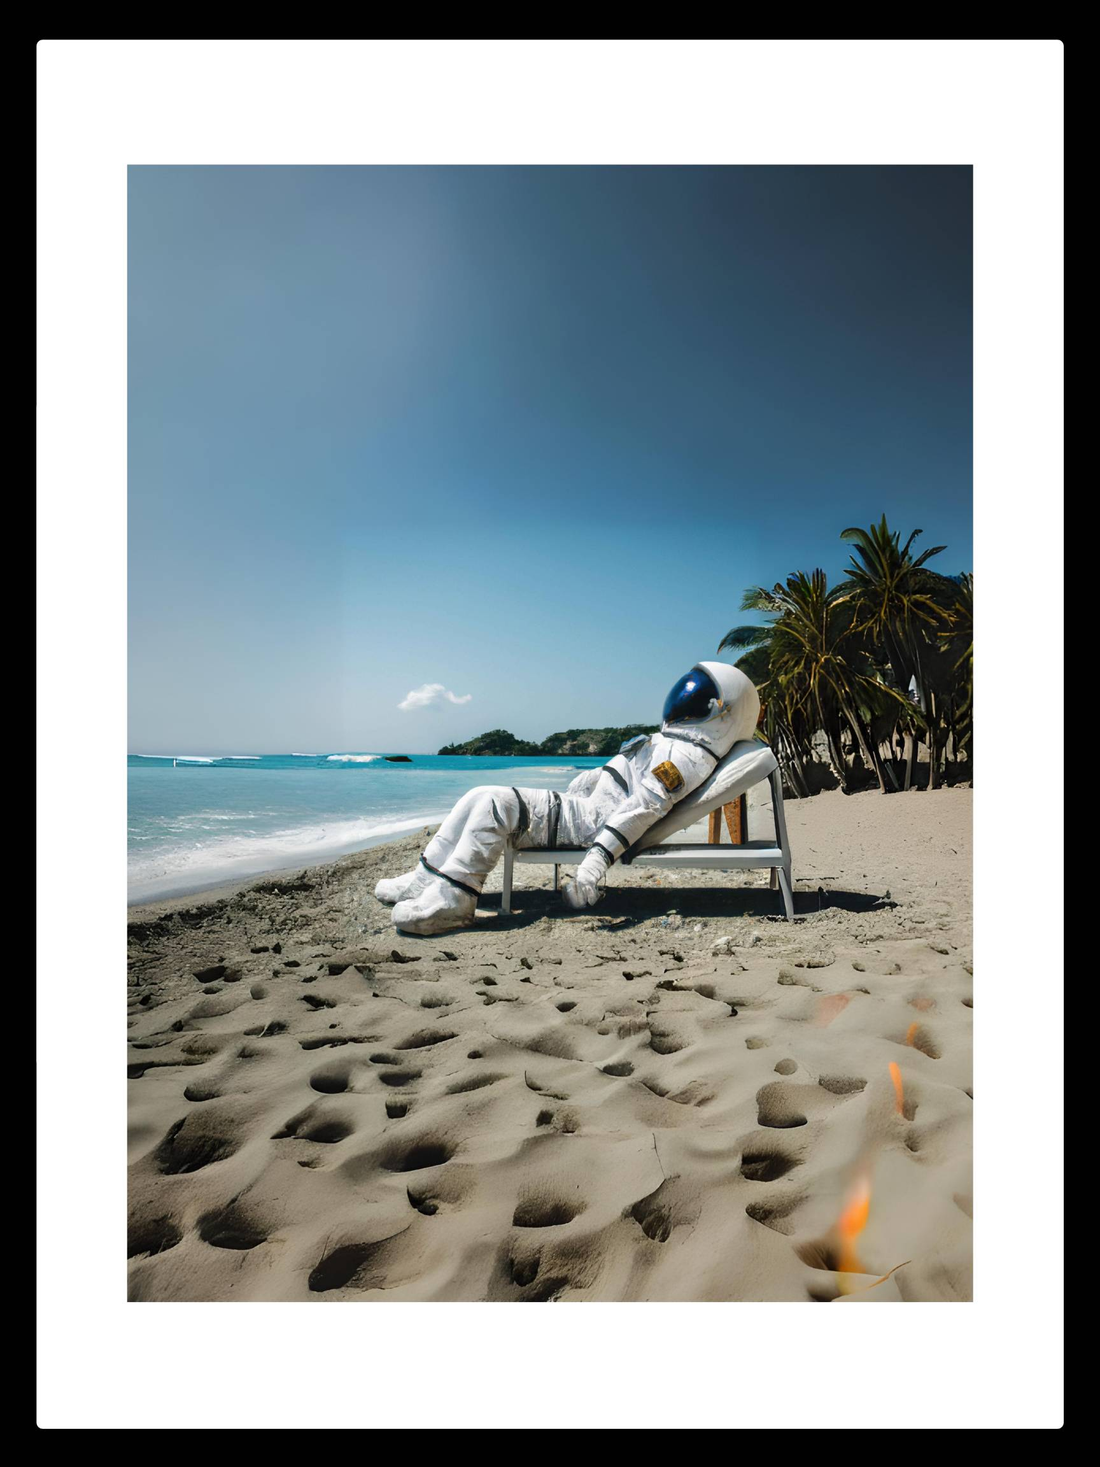 An astronaut in a sunned on a beach with greyish sand and turquoise waters. 